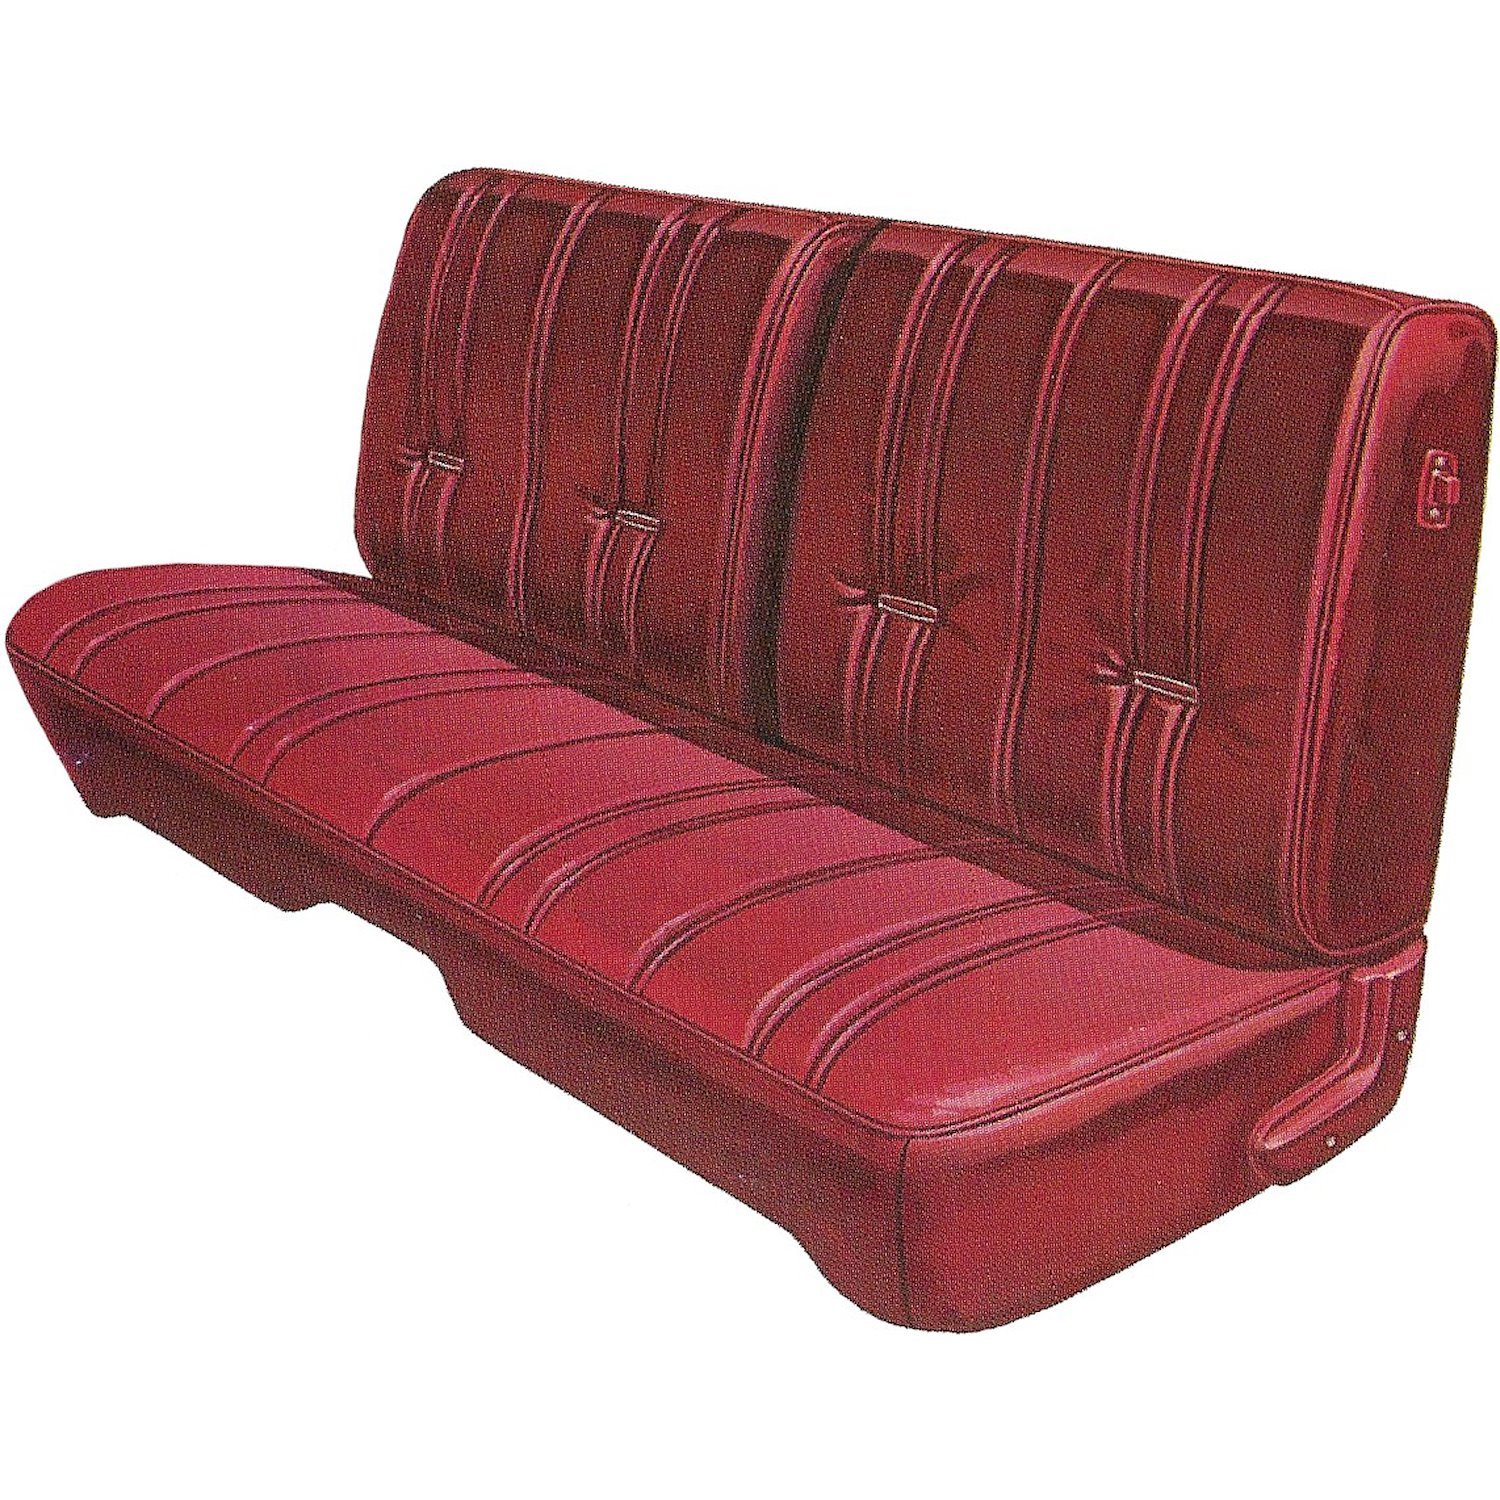 AA79CDT0020548 79 LIL RED EXPRESS STRAIGHT BENCH -